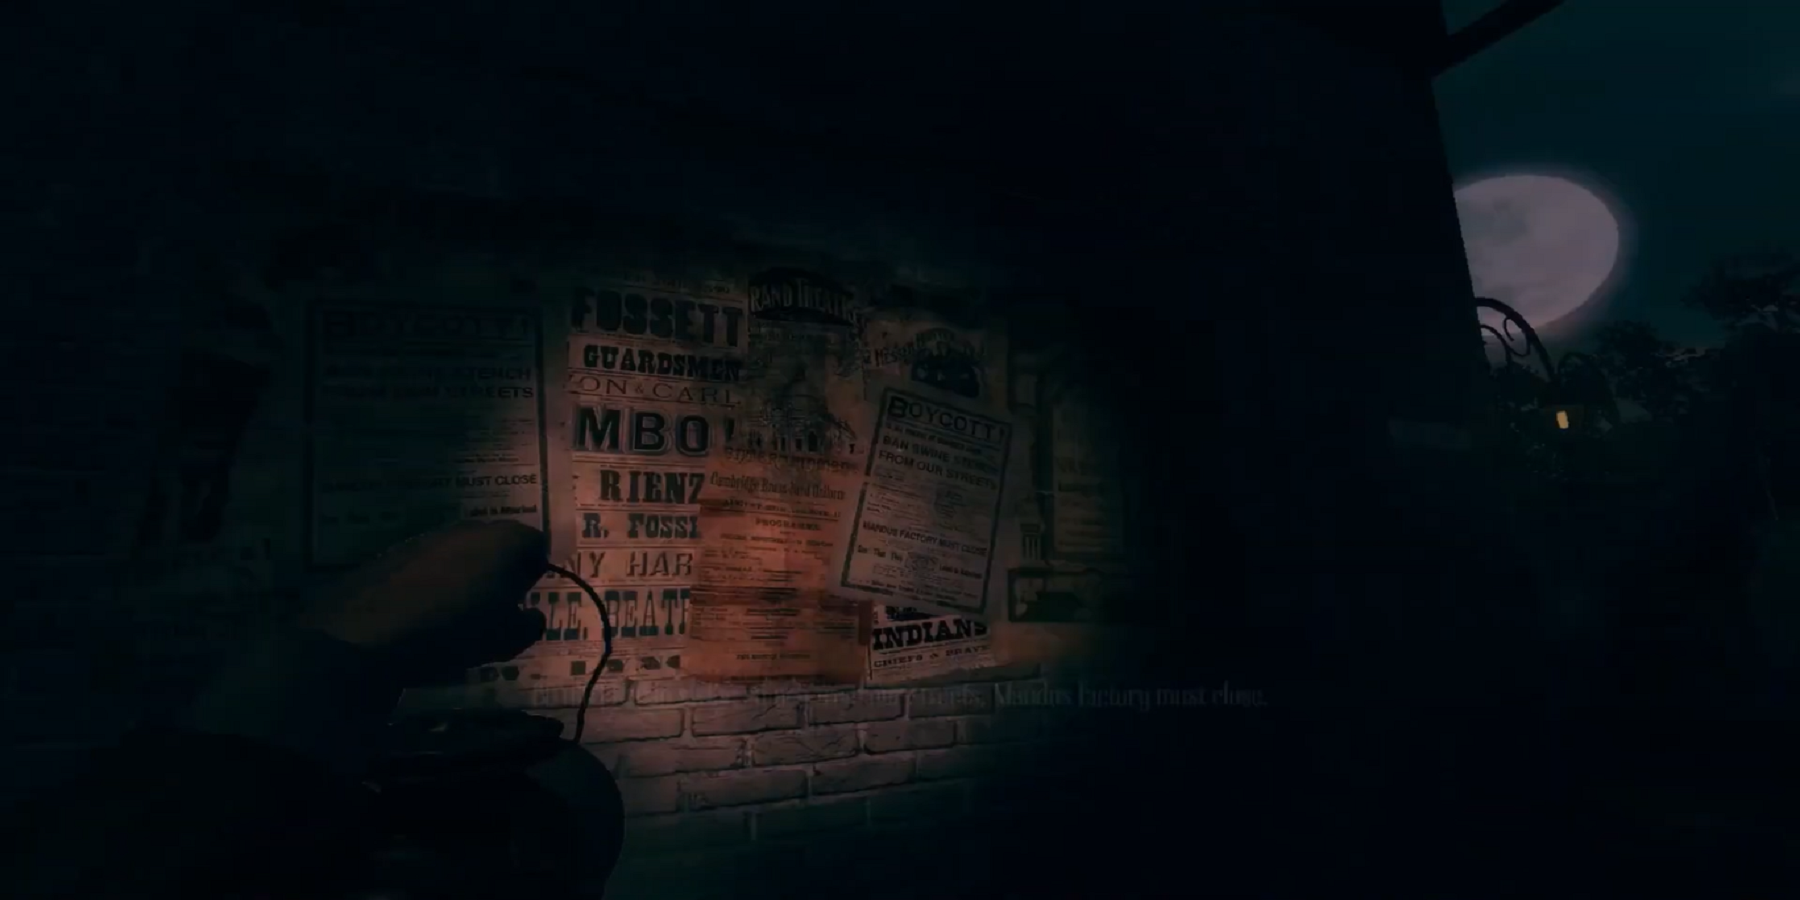 Examining the posters on an alley wall in Amnesia: A Machine For Pigs